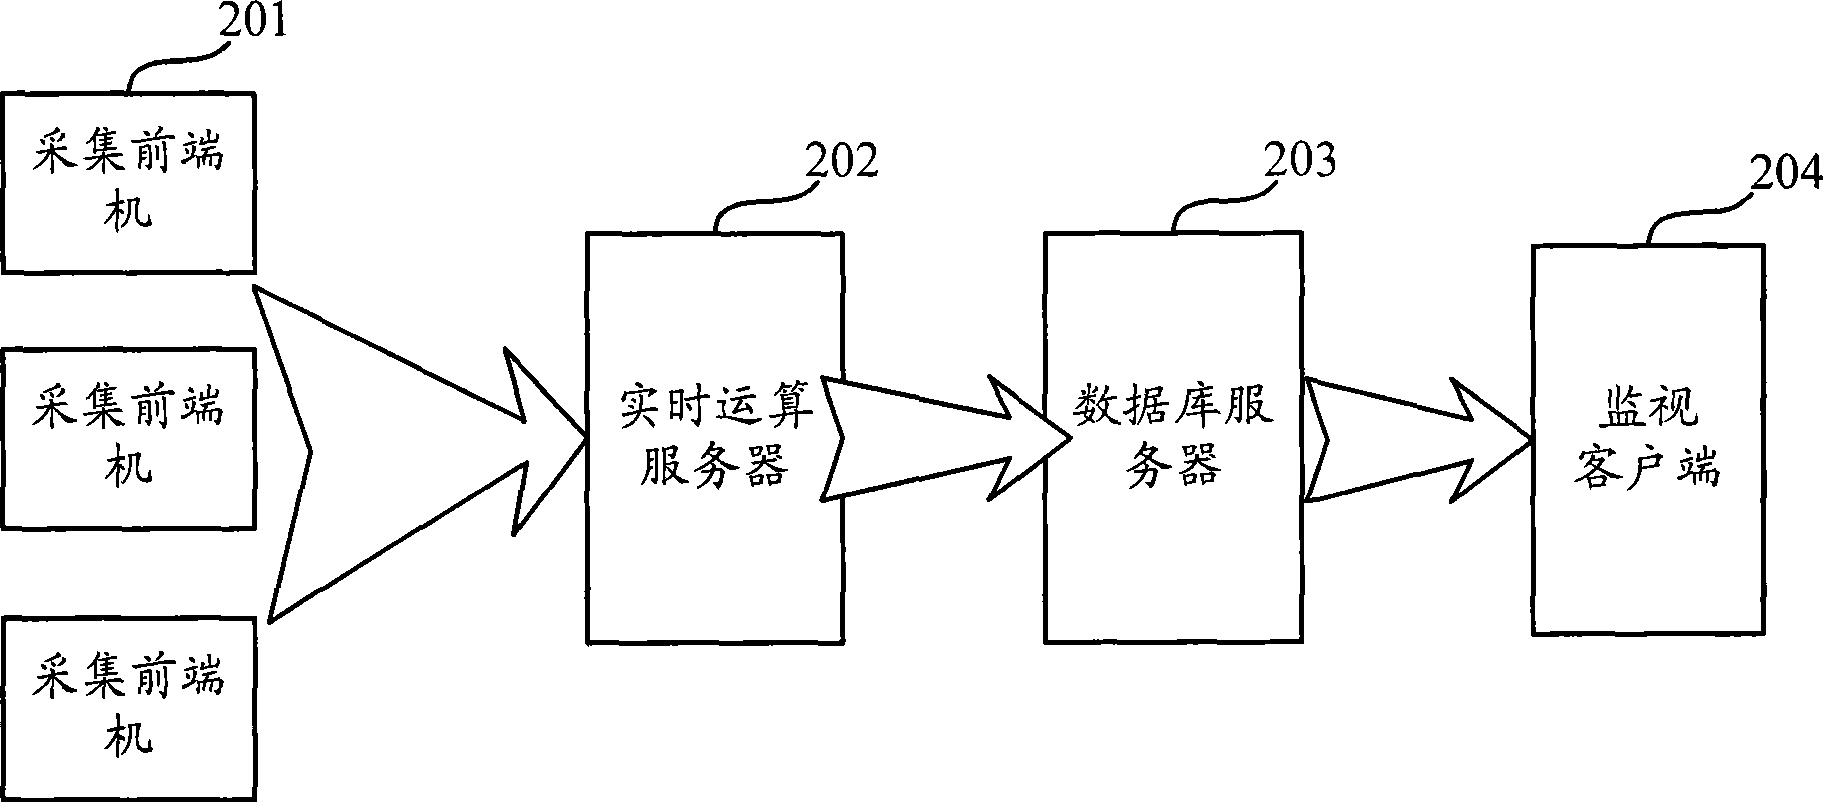 Real-time monitoring system, apparatus and method